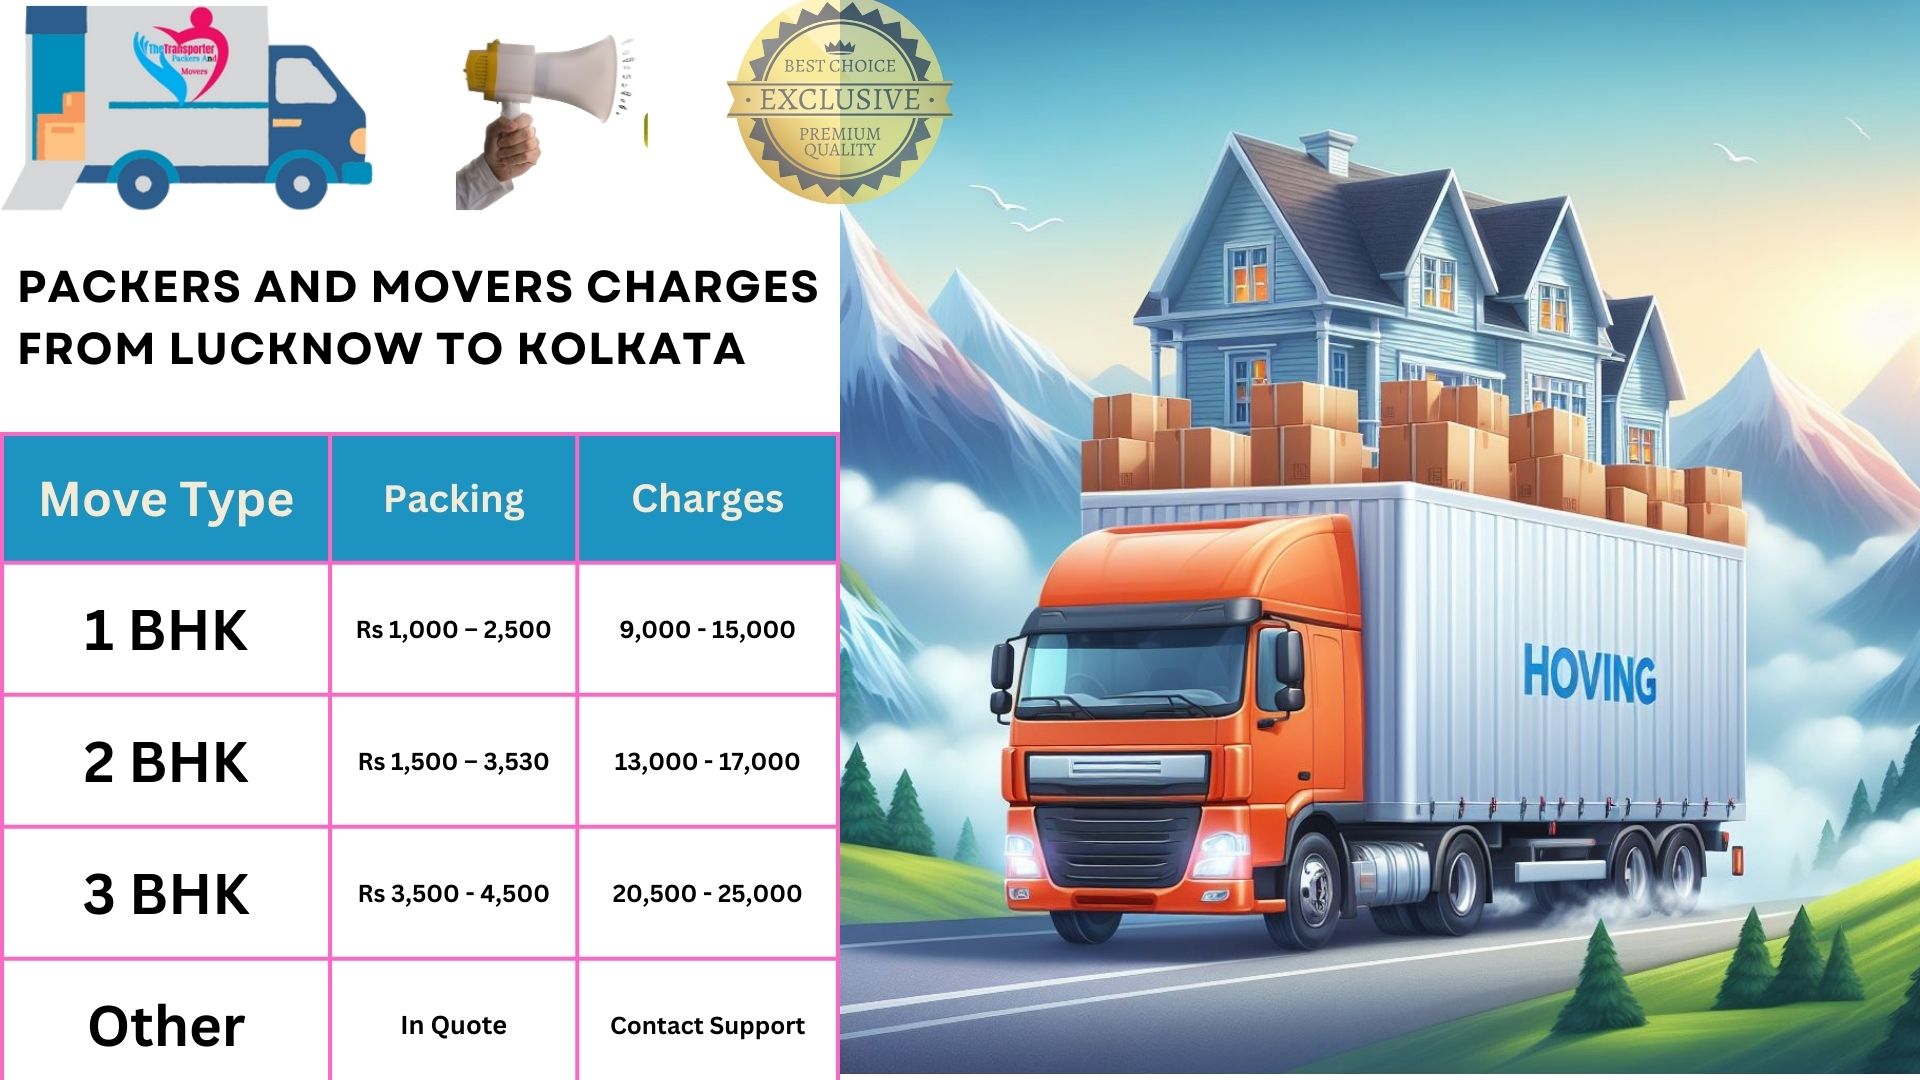 Your household goods shifting from Lucknow to Kolkata